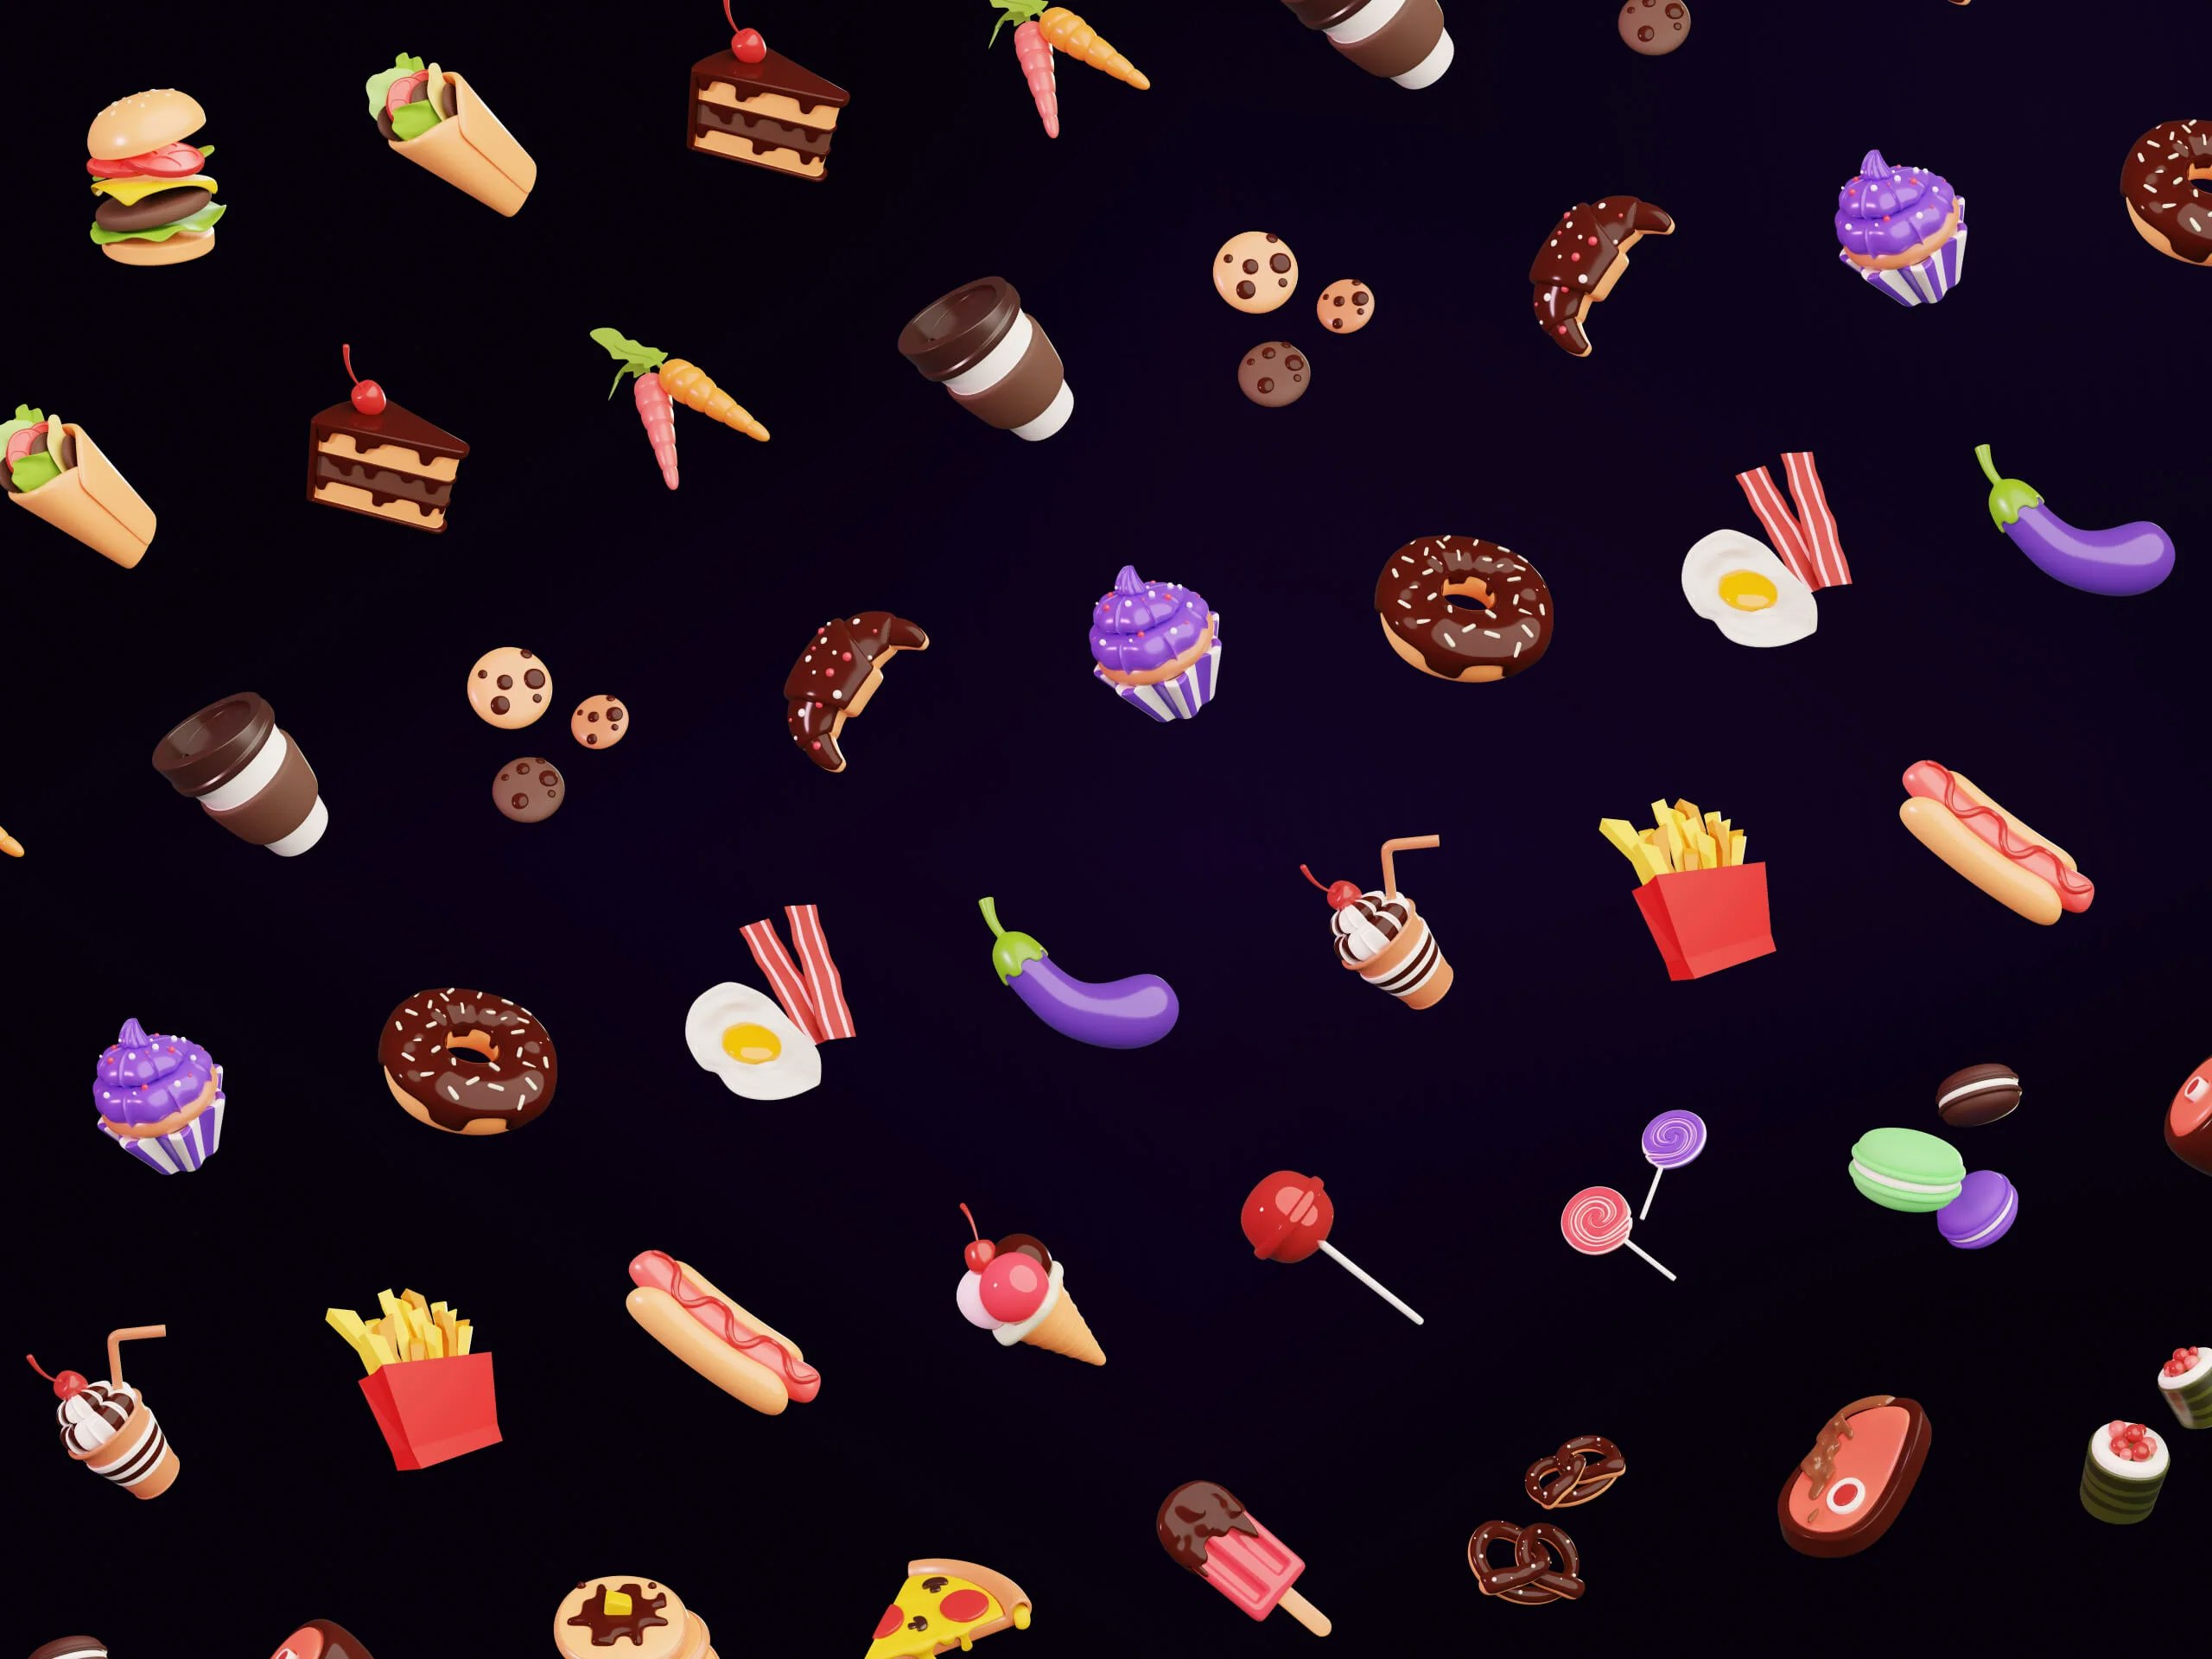 A variety of food icons stacked on top of each other.